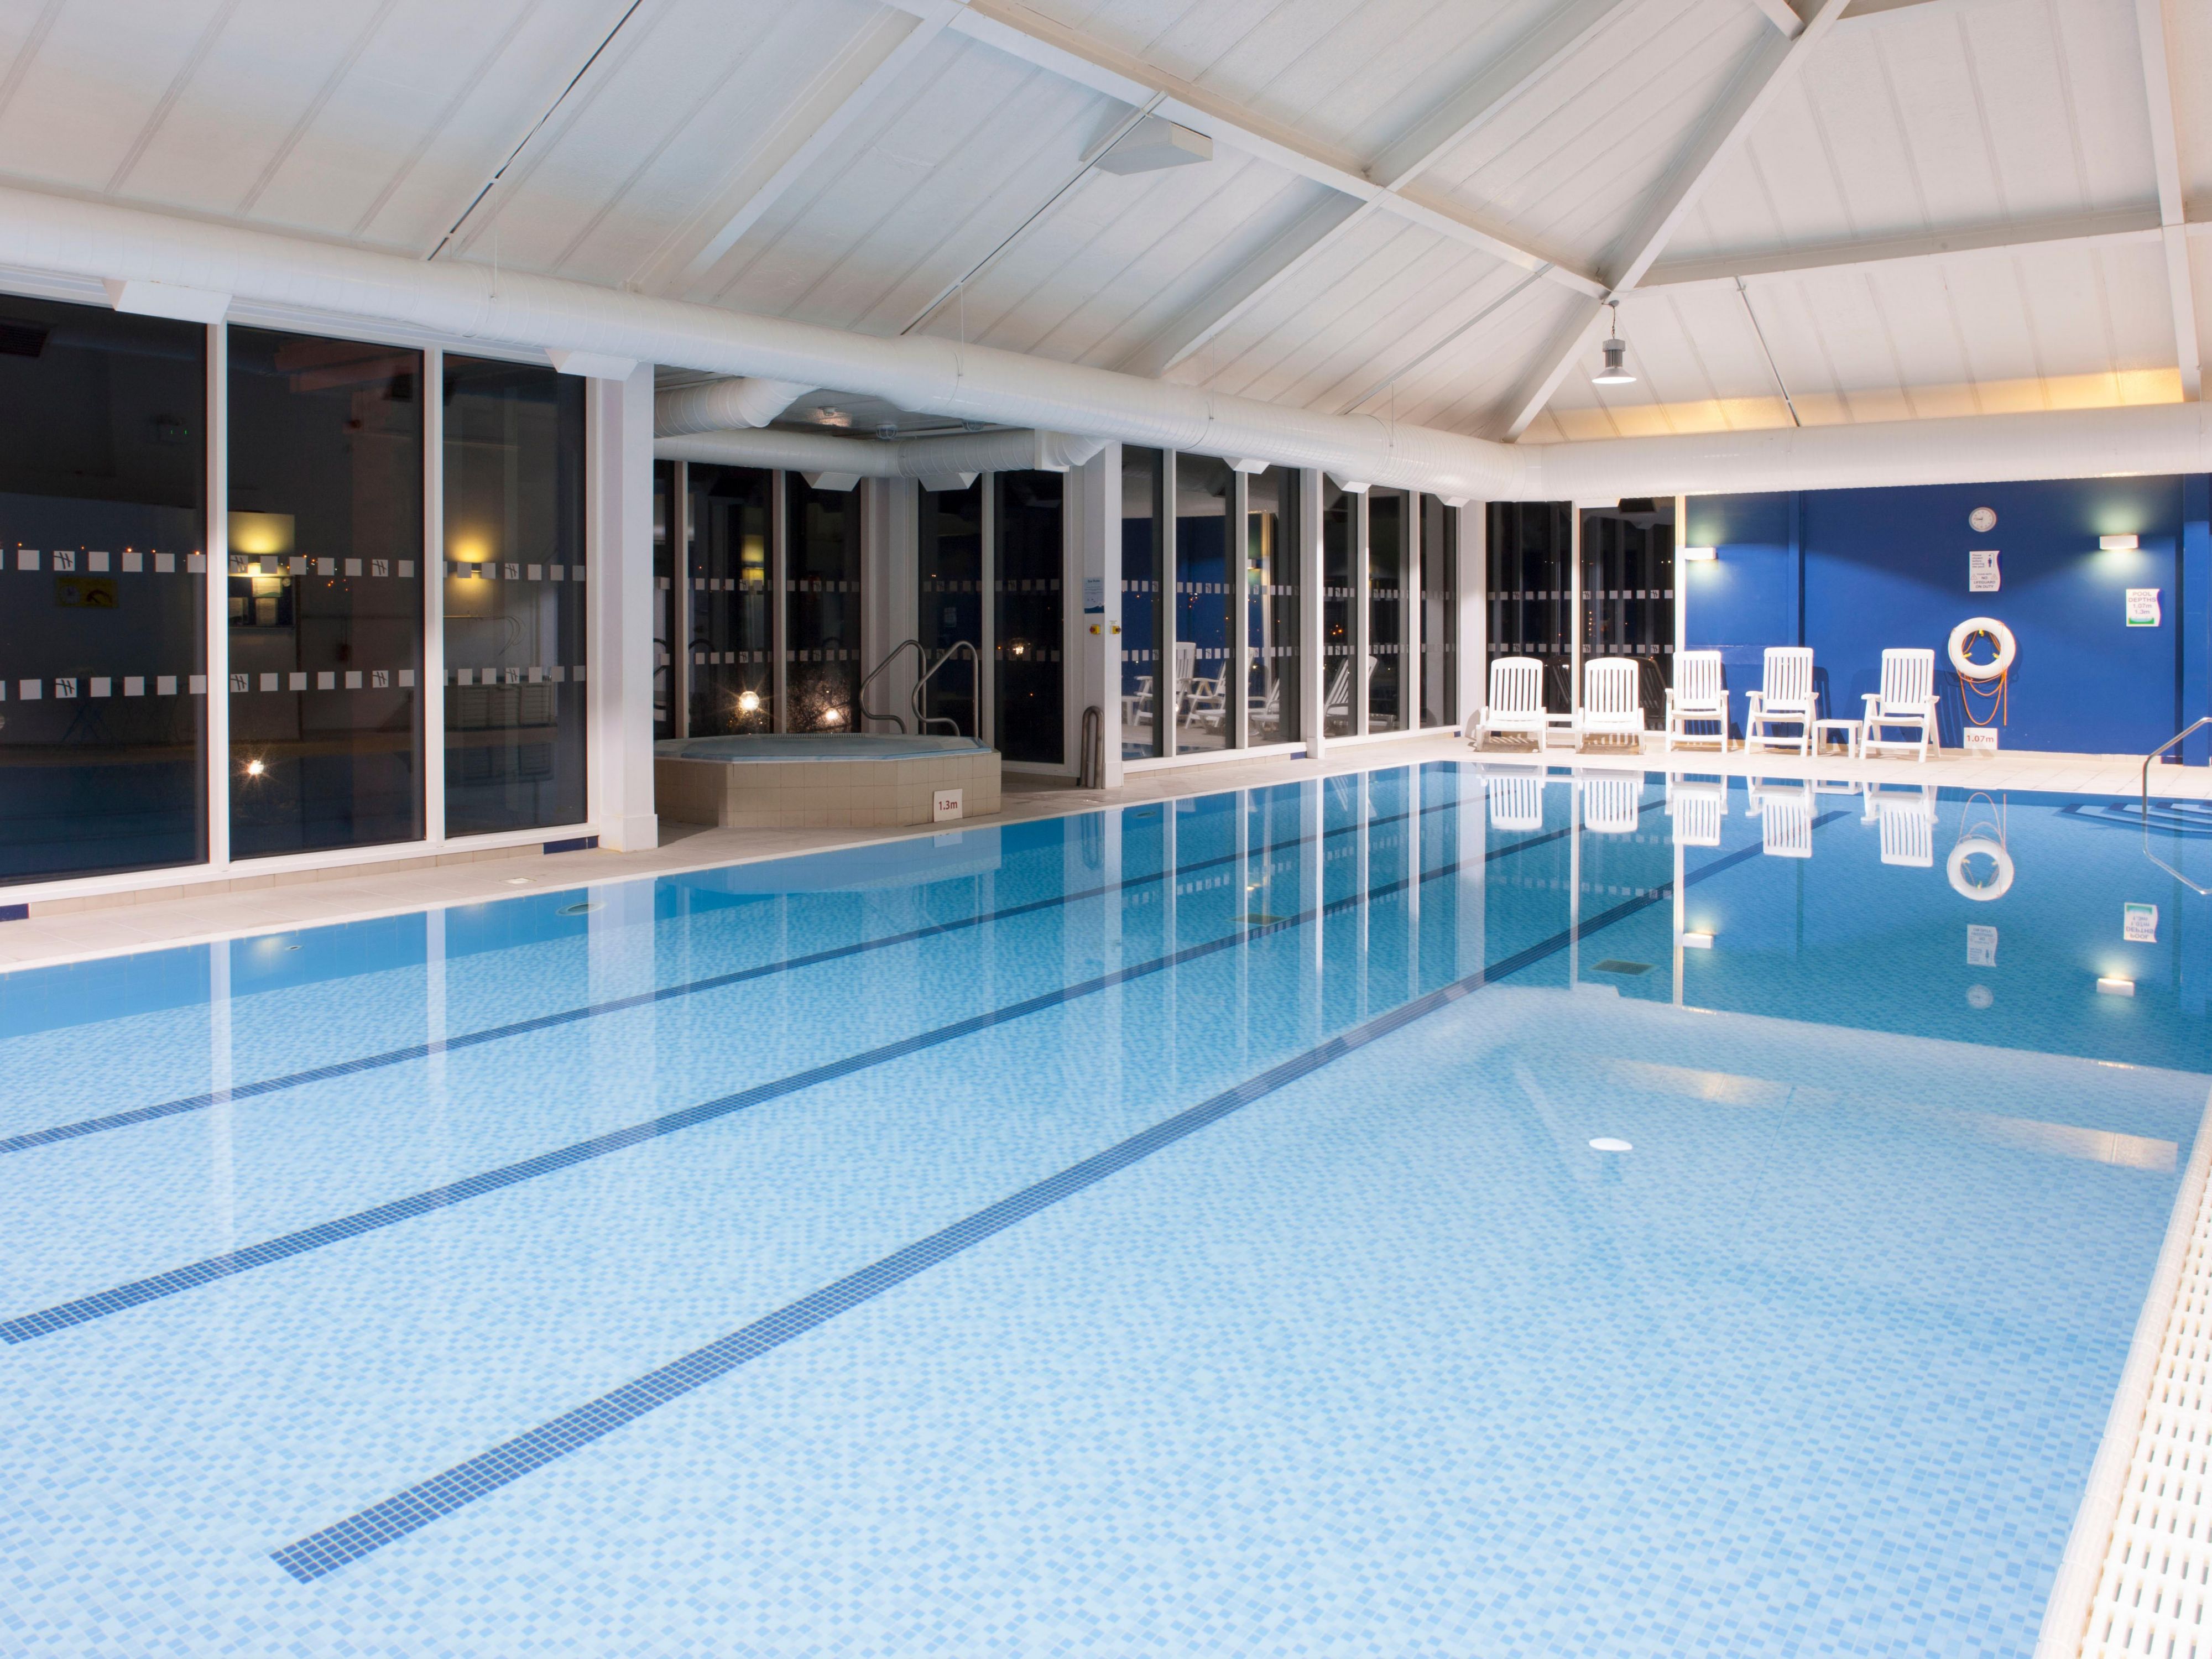 The You Fit Leeds - Brighouse features a fully equipped gym, including a swimming pool, spa pool, sauna, and steam room. 
 
Guests can enjoy complimentary use of our leisure club within the hotel, with splendid views across the local countryside from our heated swimming pool and spa pool.